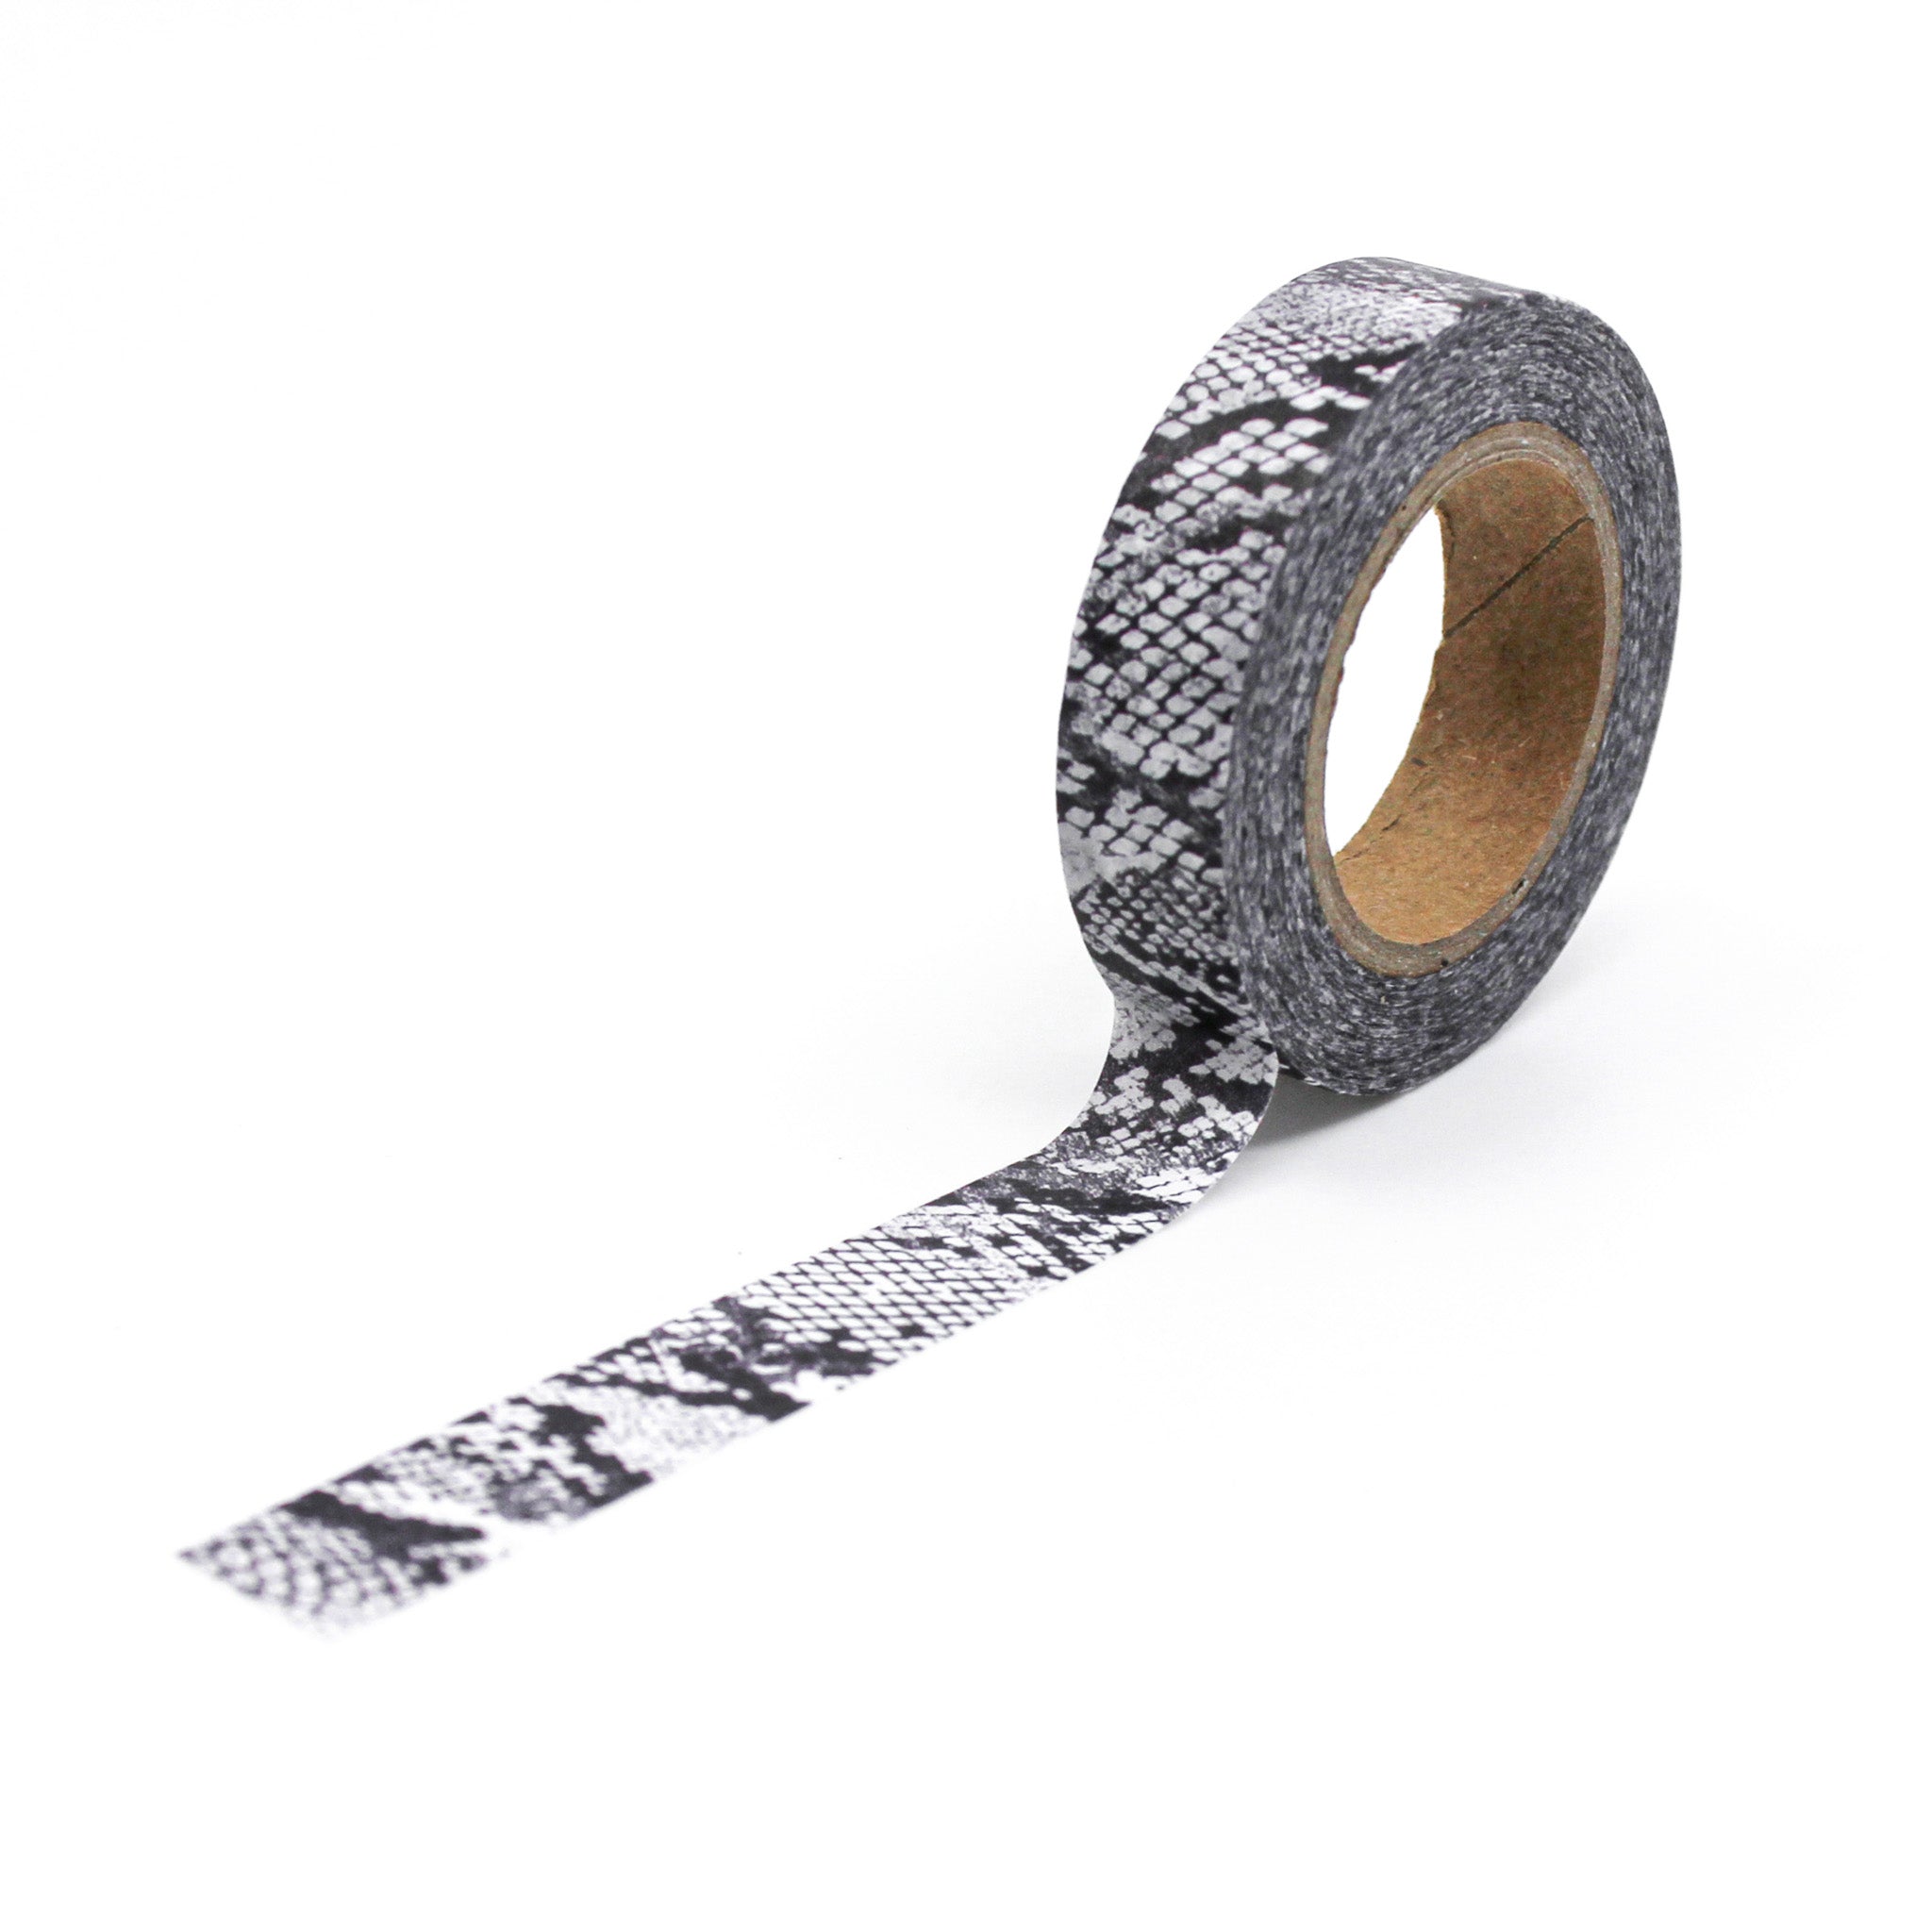 This is a full pattern repeat view of black snakeskin washi tape from BBB Supplies Craft Shop